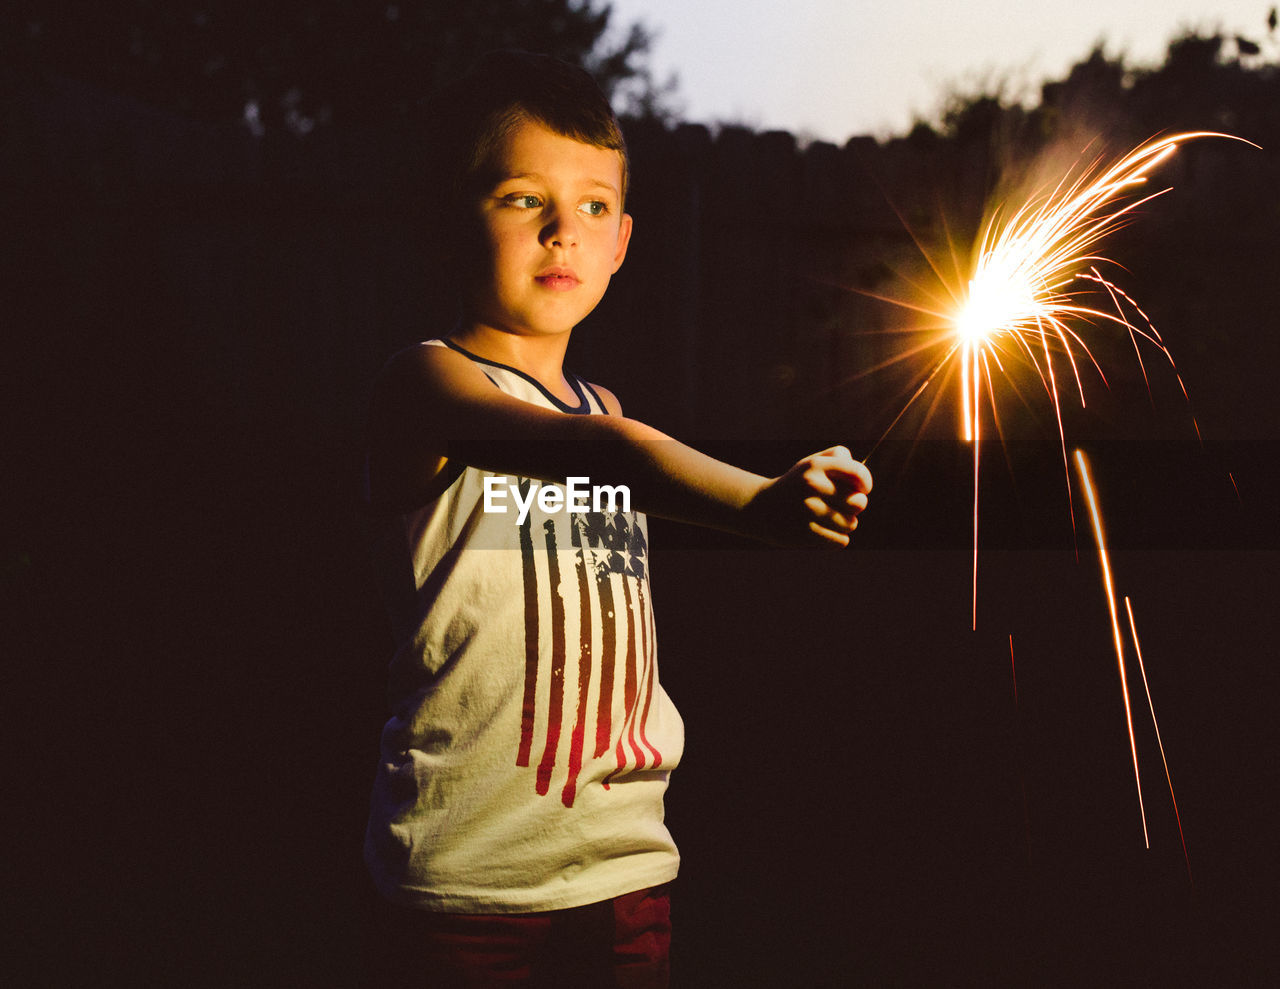 Cute boy holding sparkler standing outdoors